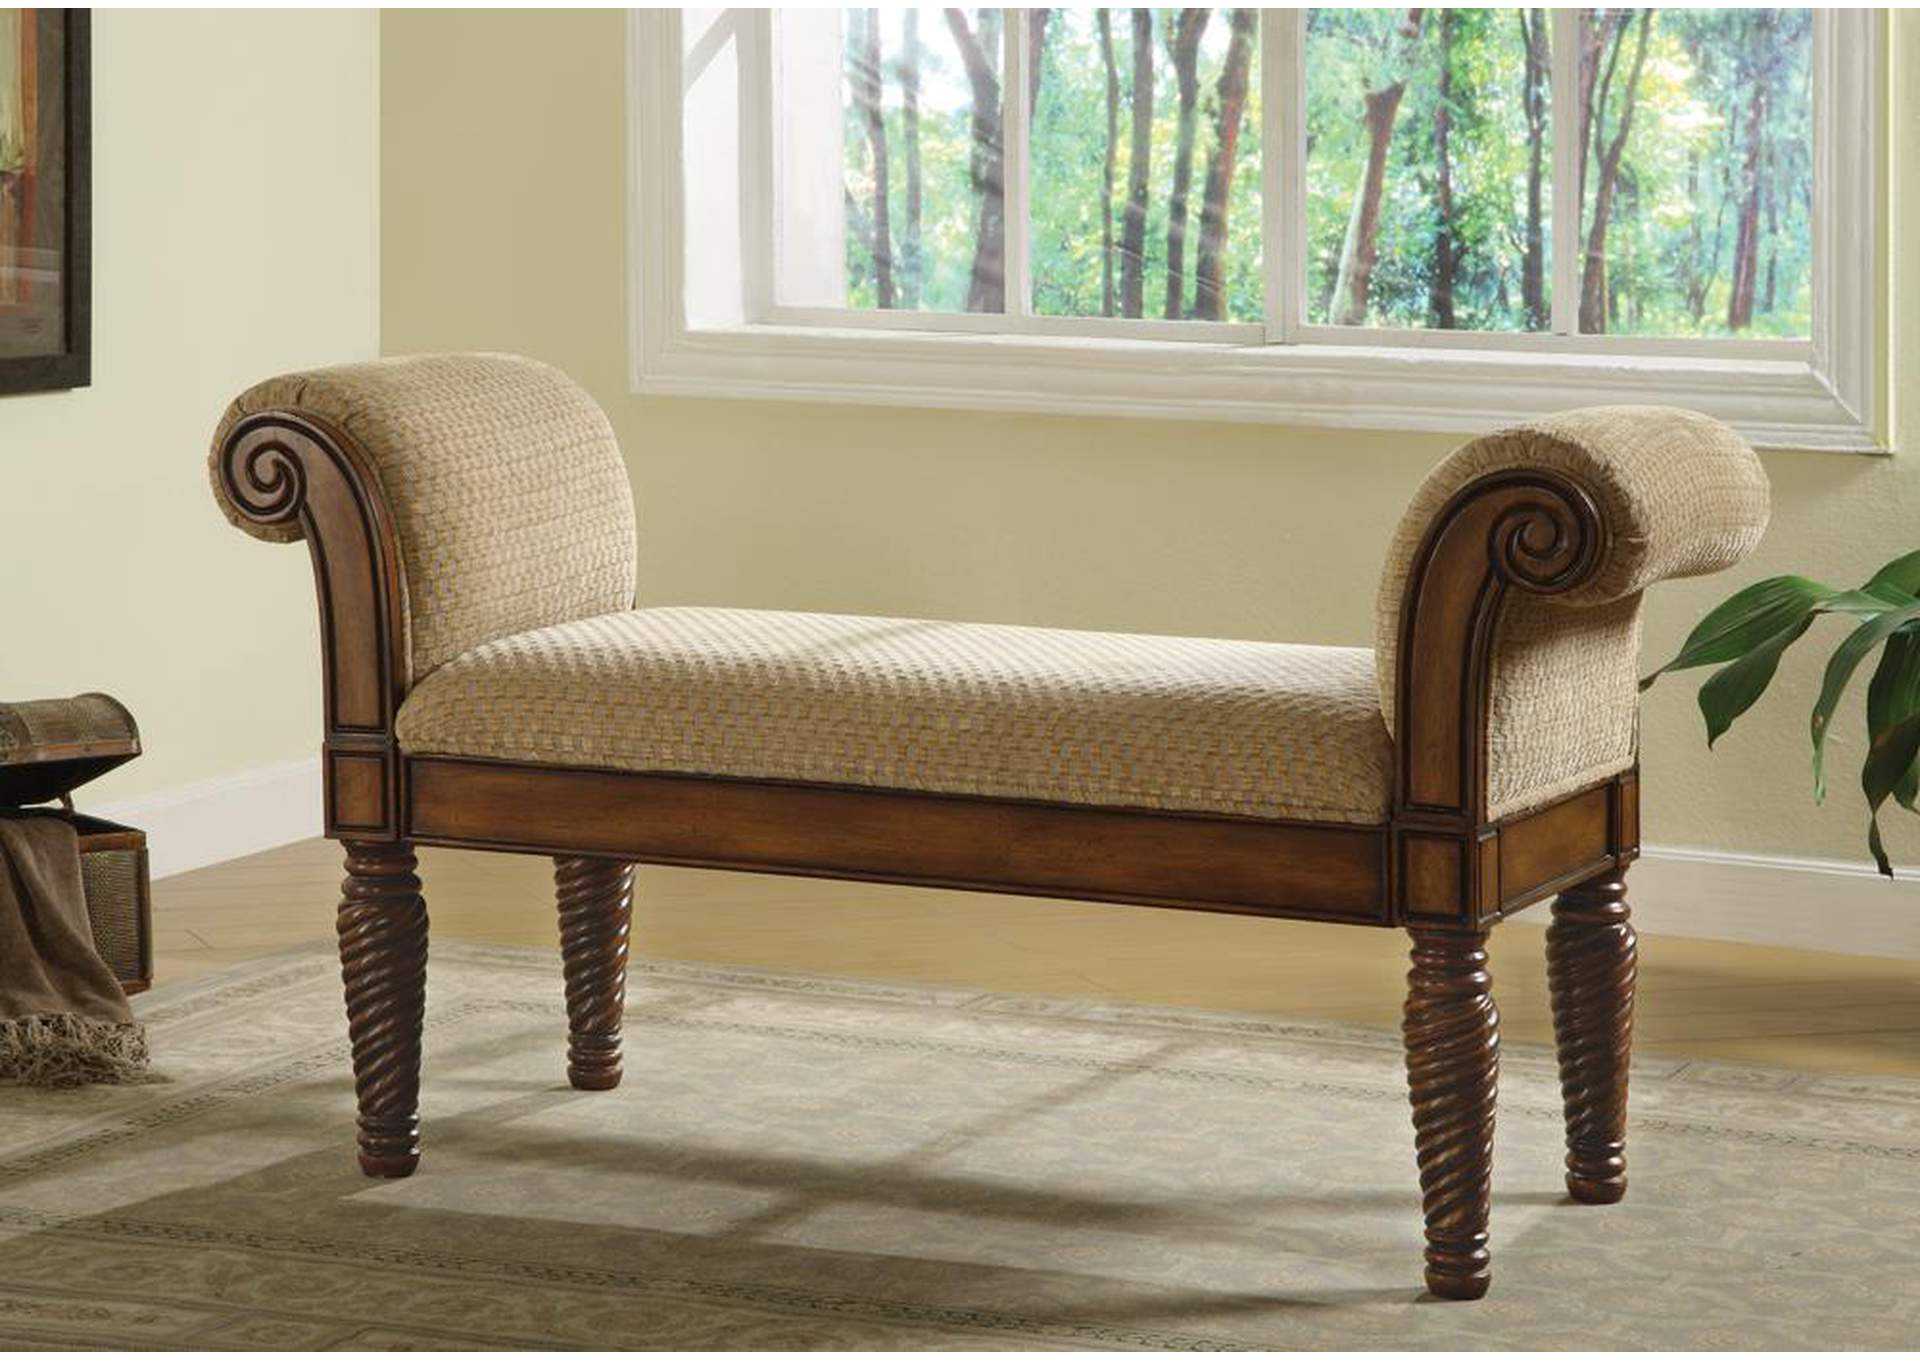 Beige & Brown Stately Upholstered Bench,ABF Coaster Furniture